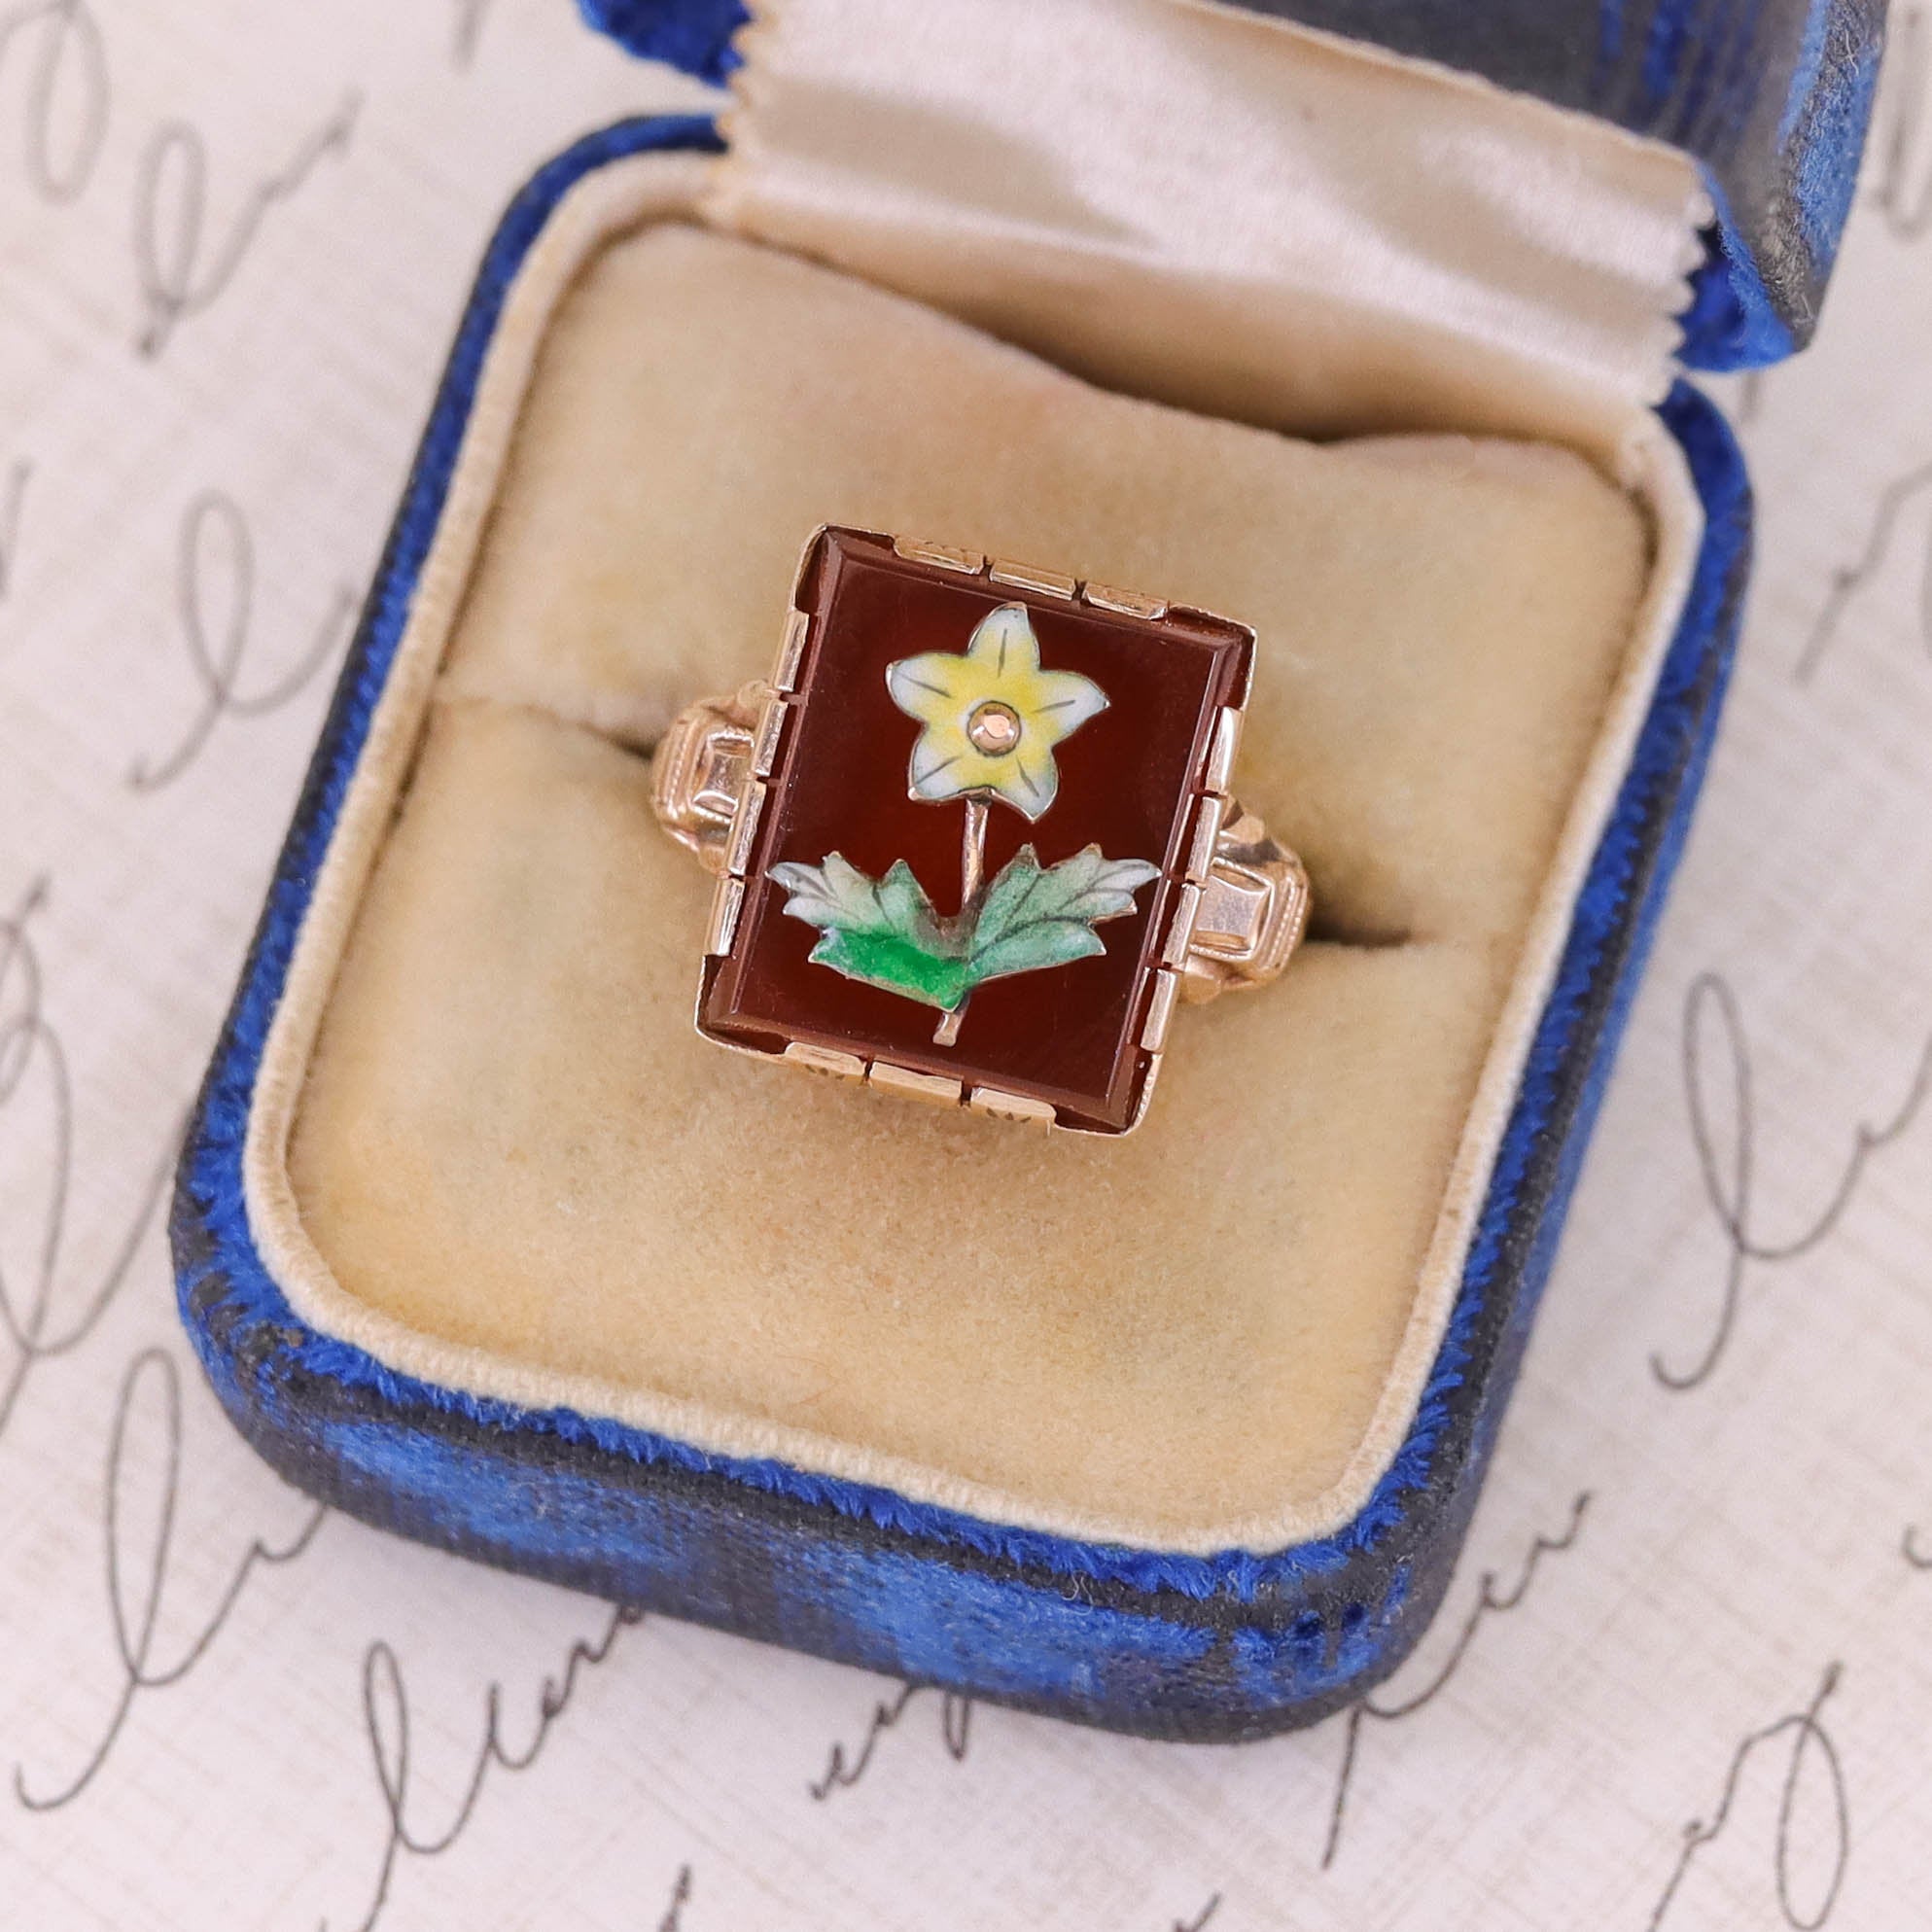 Antique Carnelian and Enamel Flower Conversion Ring of 10k Gold